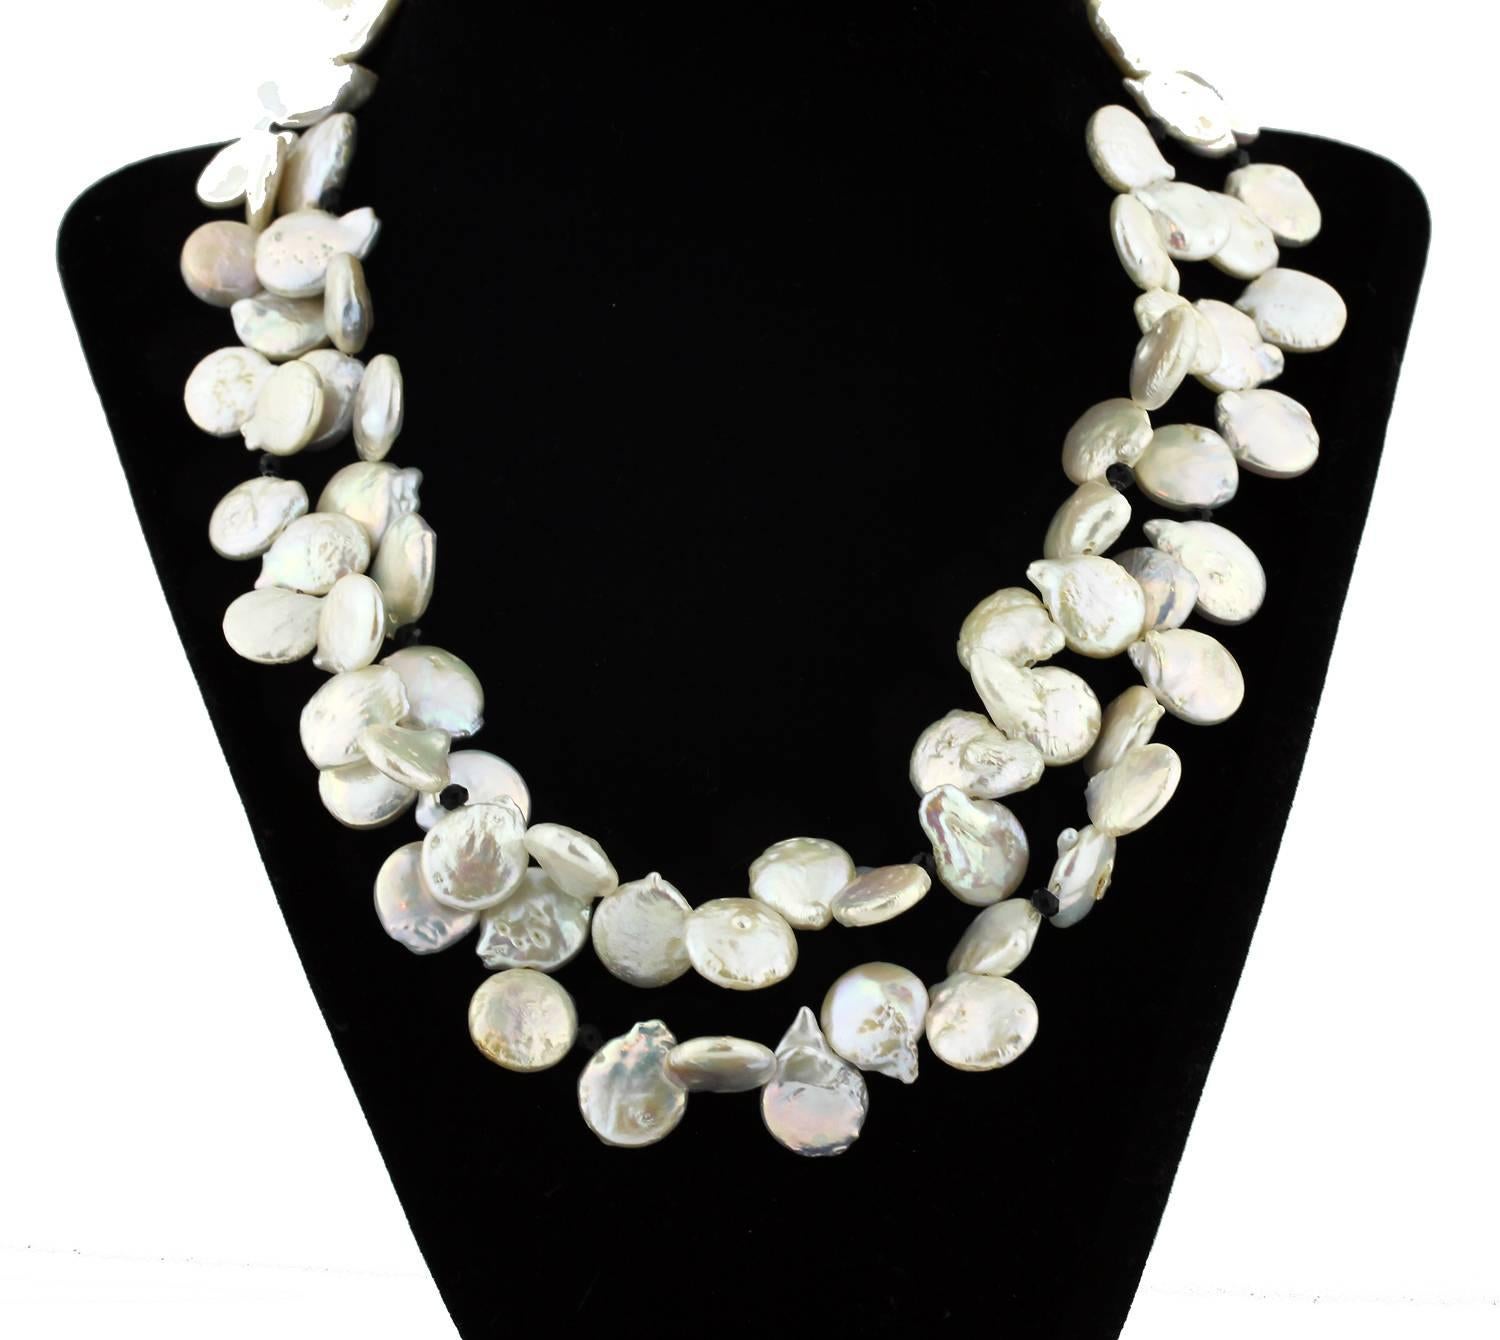 Double strand of "swingy&uquot; beautiful leaves of cultured white Pearls enhanced intermittently with sparkling black Spinel.
Size:  Pearls slightly graduated to approximately 16 mm
Length:  17.75 inches
Clasp:  Diamond encrusted Sterling